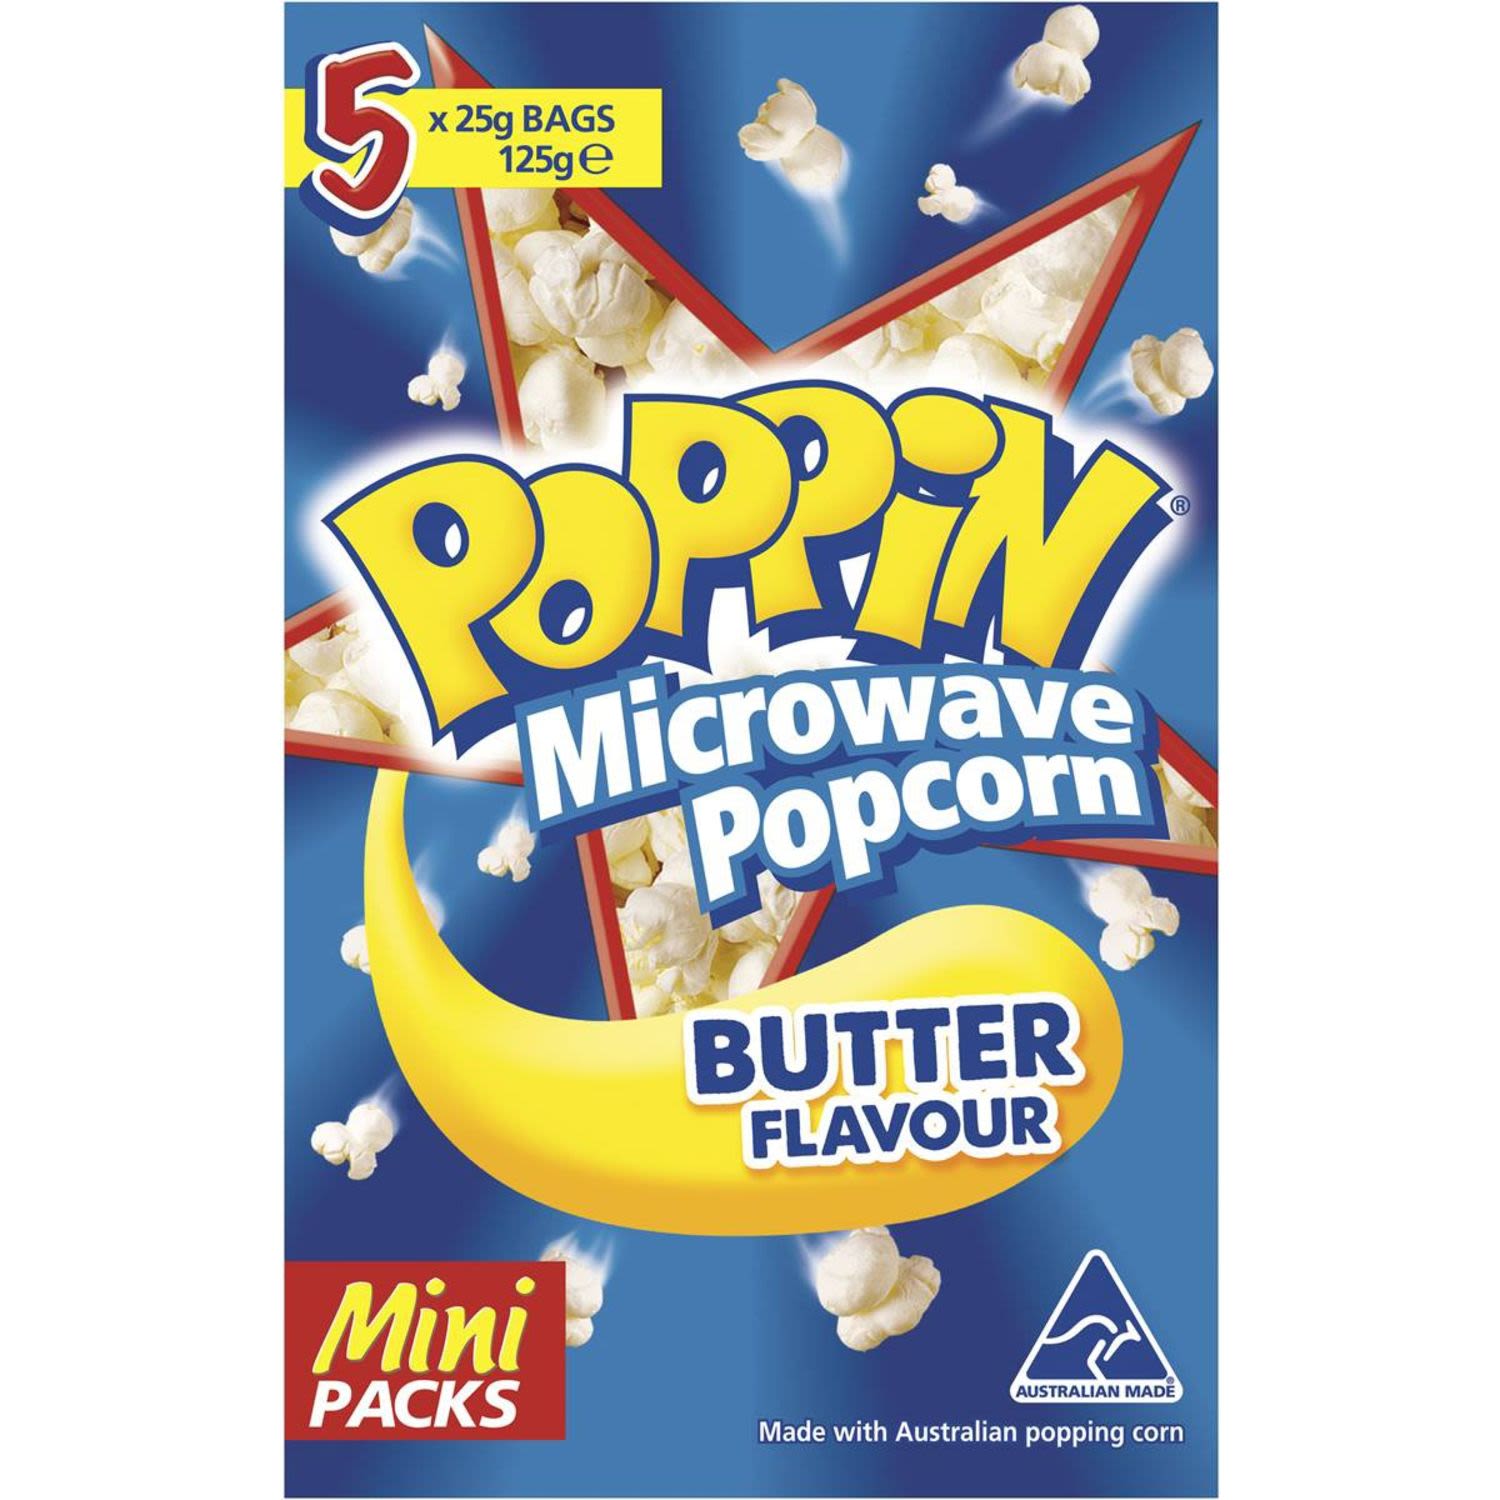 Poppin Shakers Microwave Popcorn Butter Flavour, 5 Each